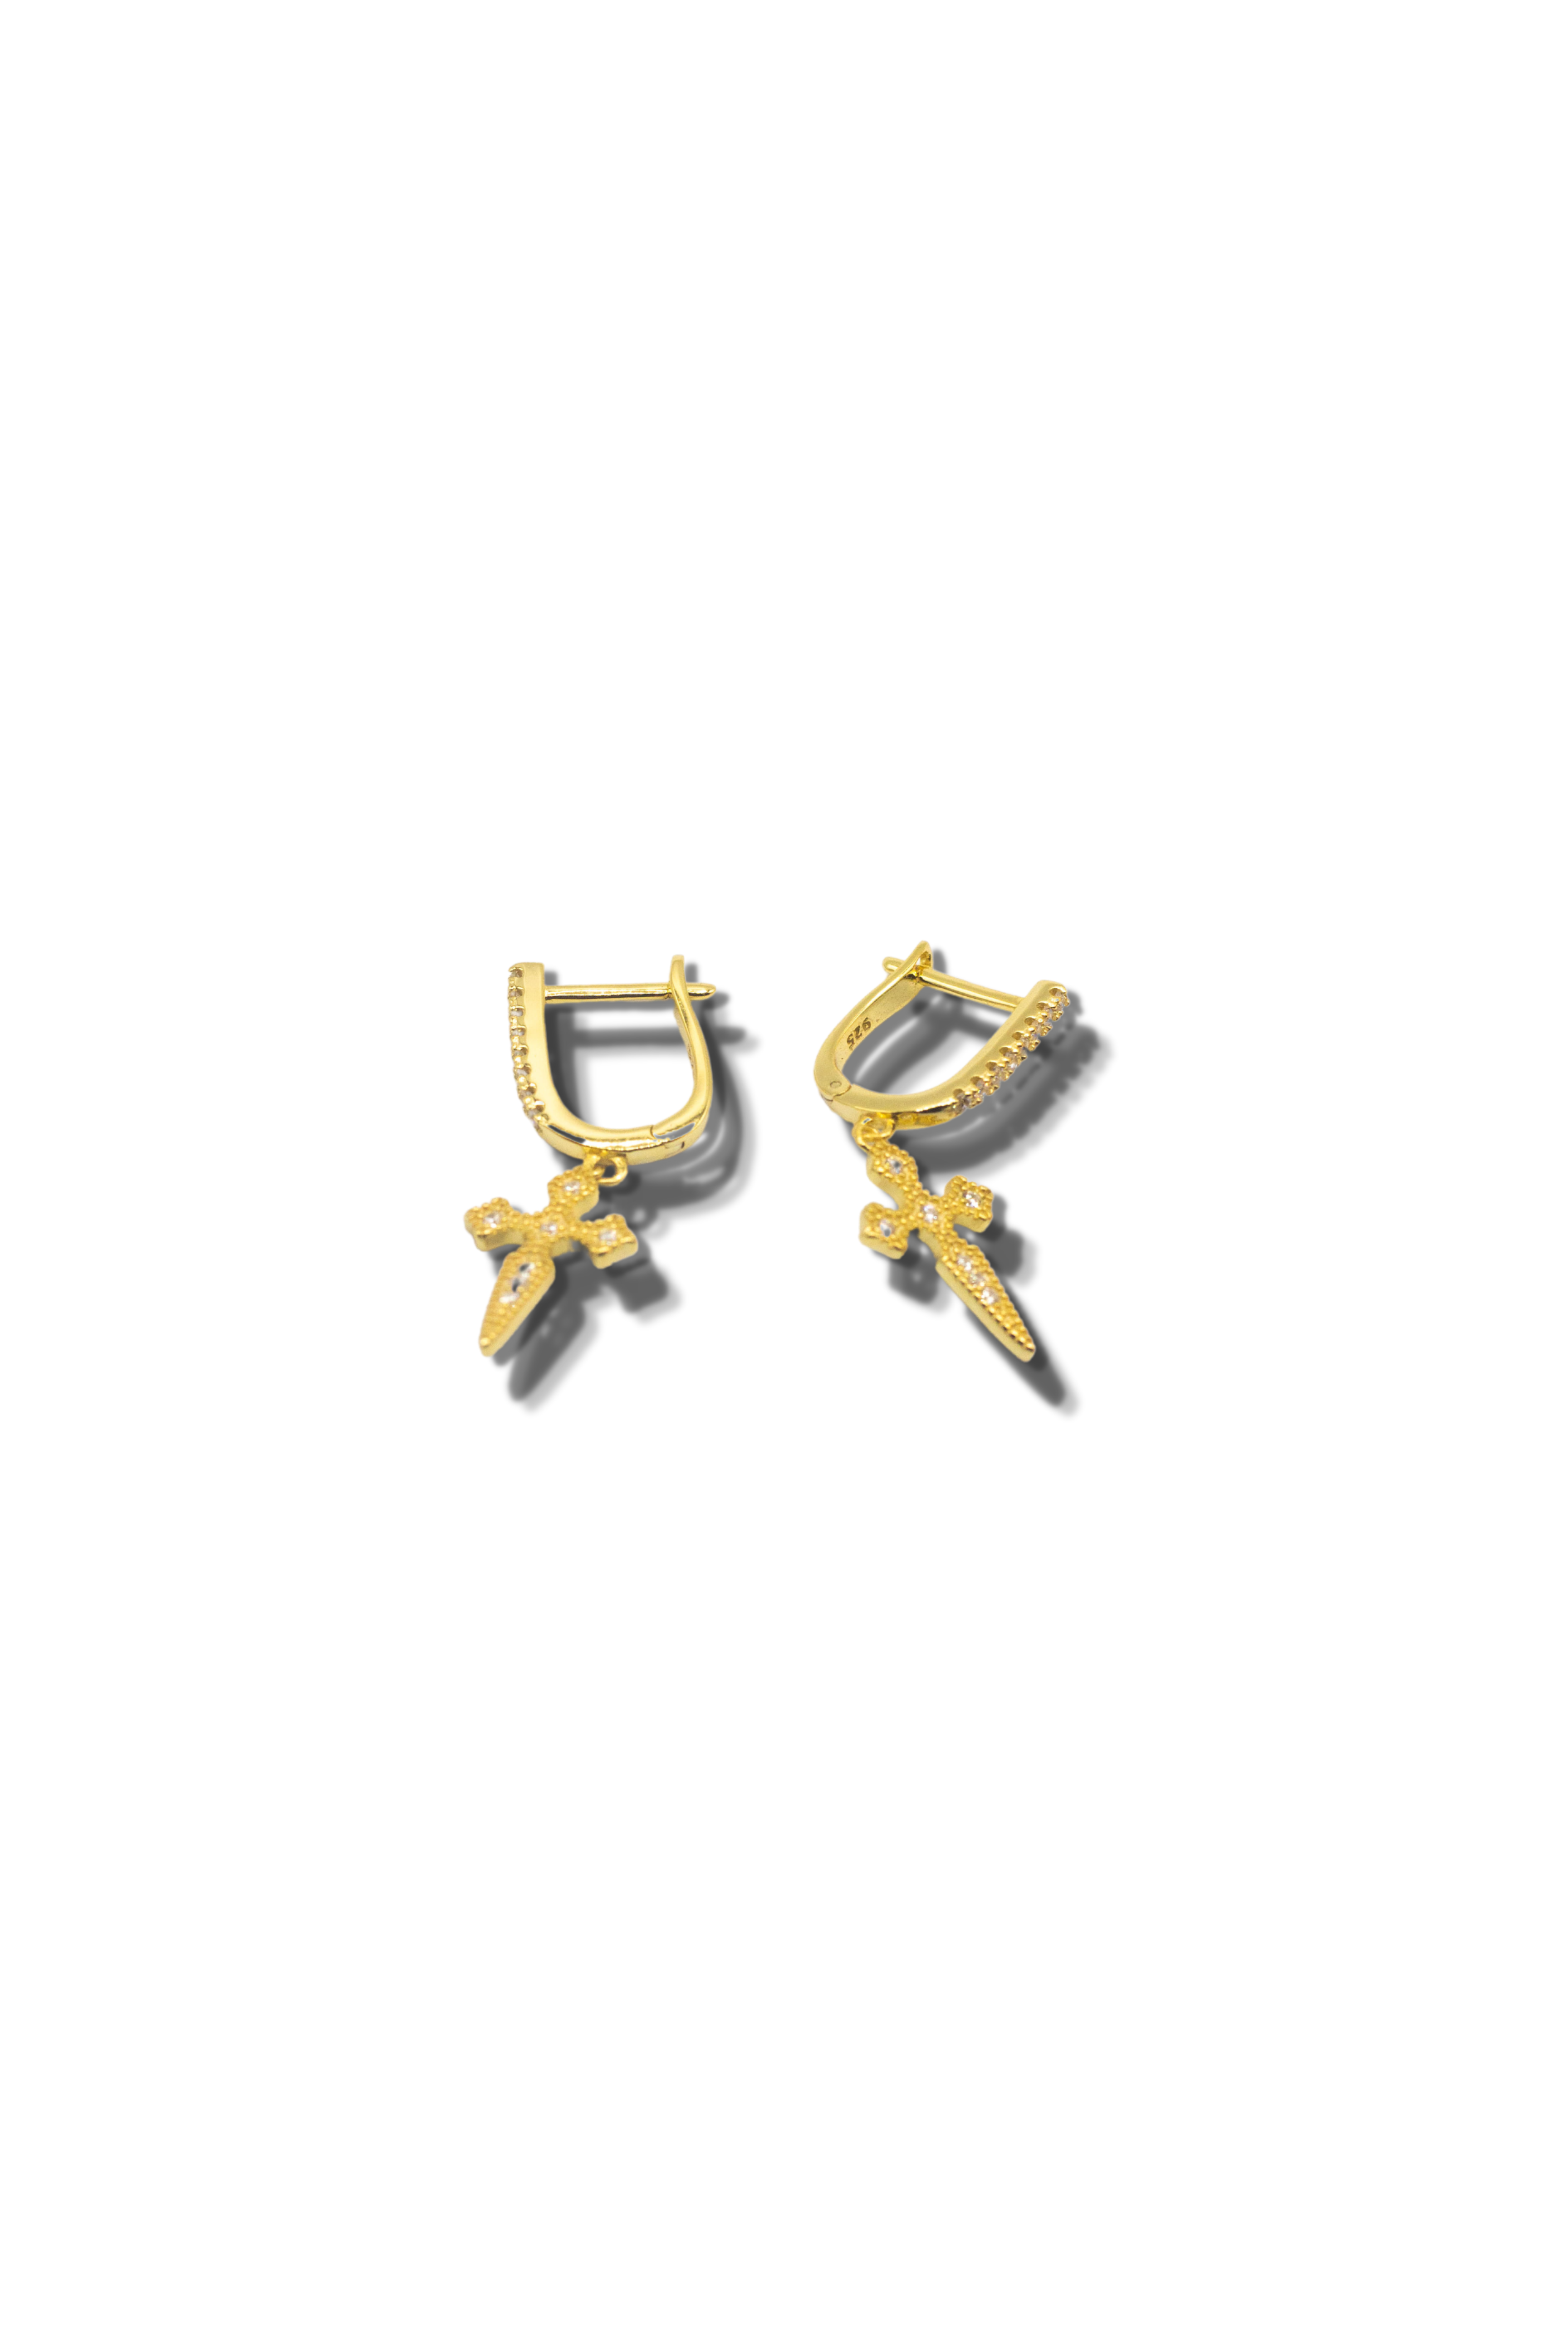 18k gold stainless steel earrings. The earrings have a cross charm attached. Cross Cubic Zirconia Huggies by E's Element.